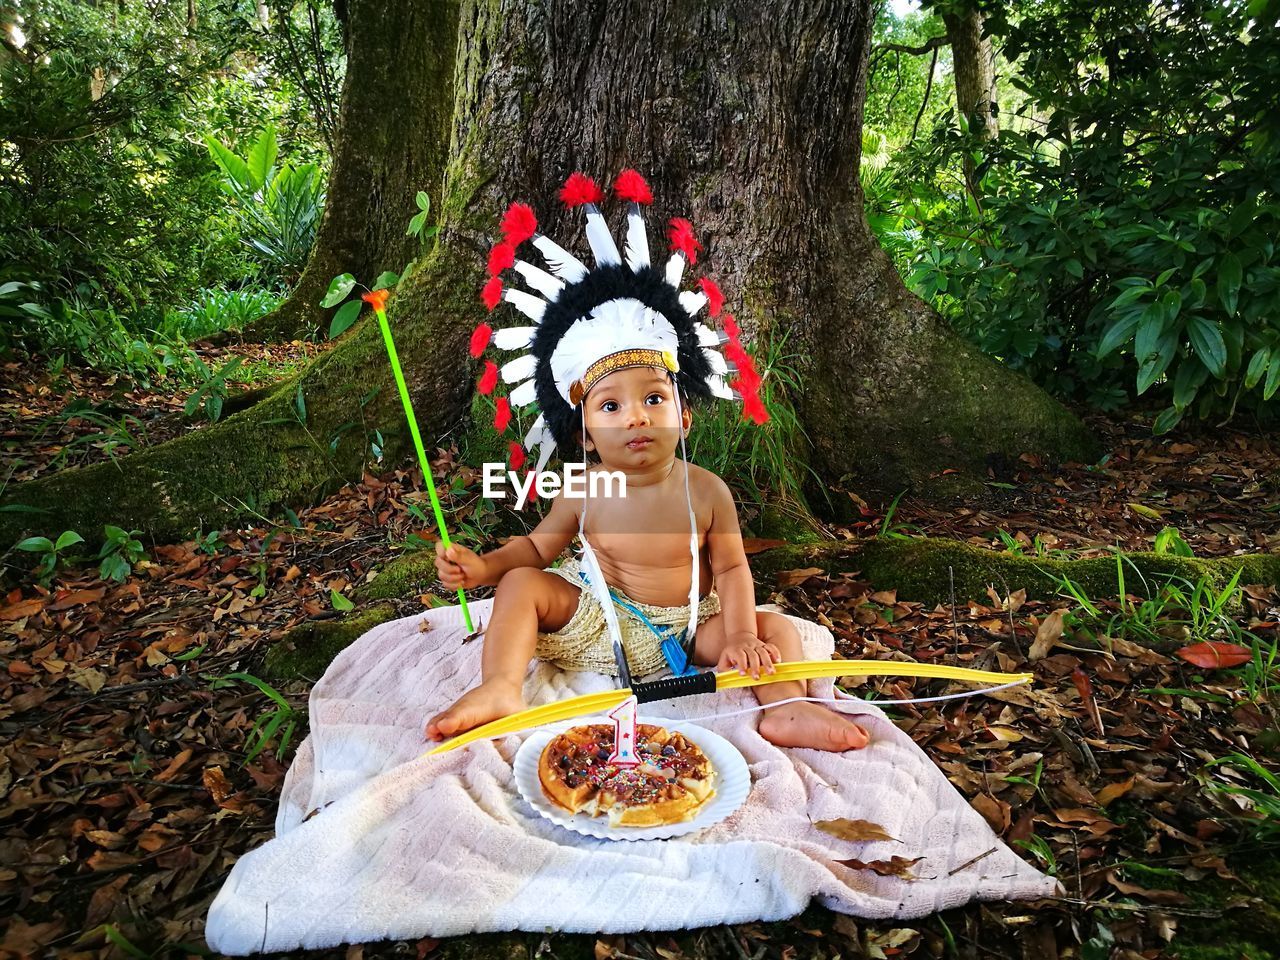 Baby boy wearing traditional headdress while sitting with birthday cake against tree in forest